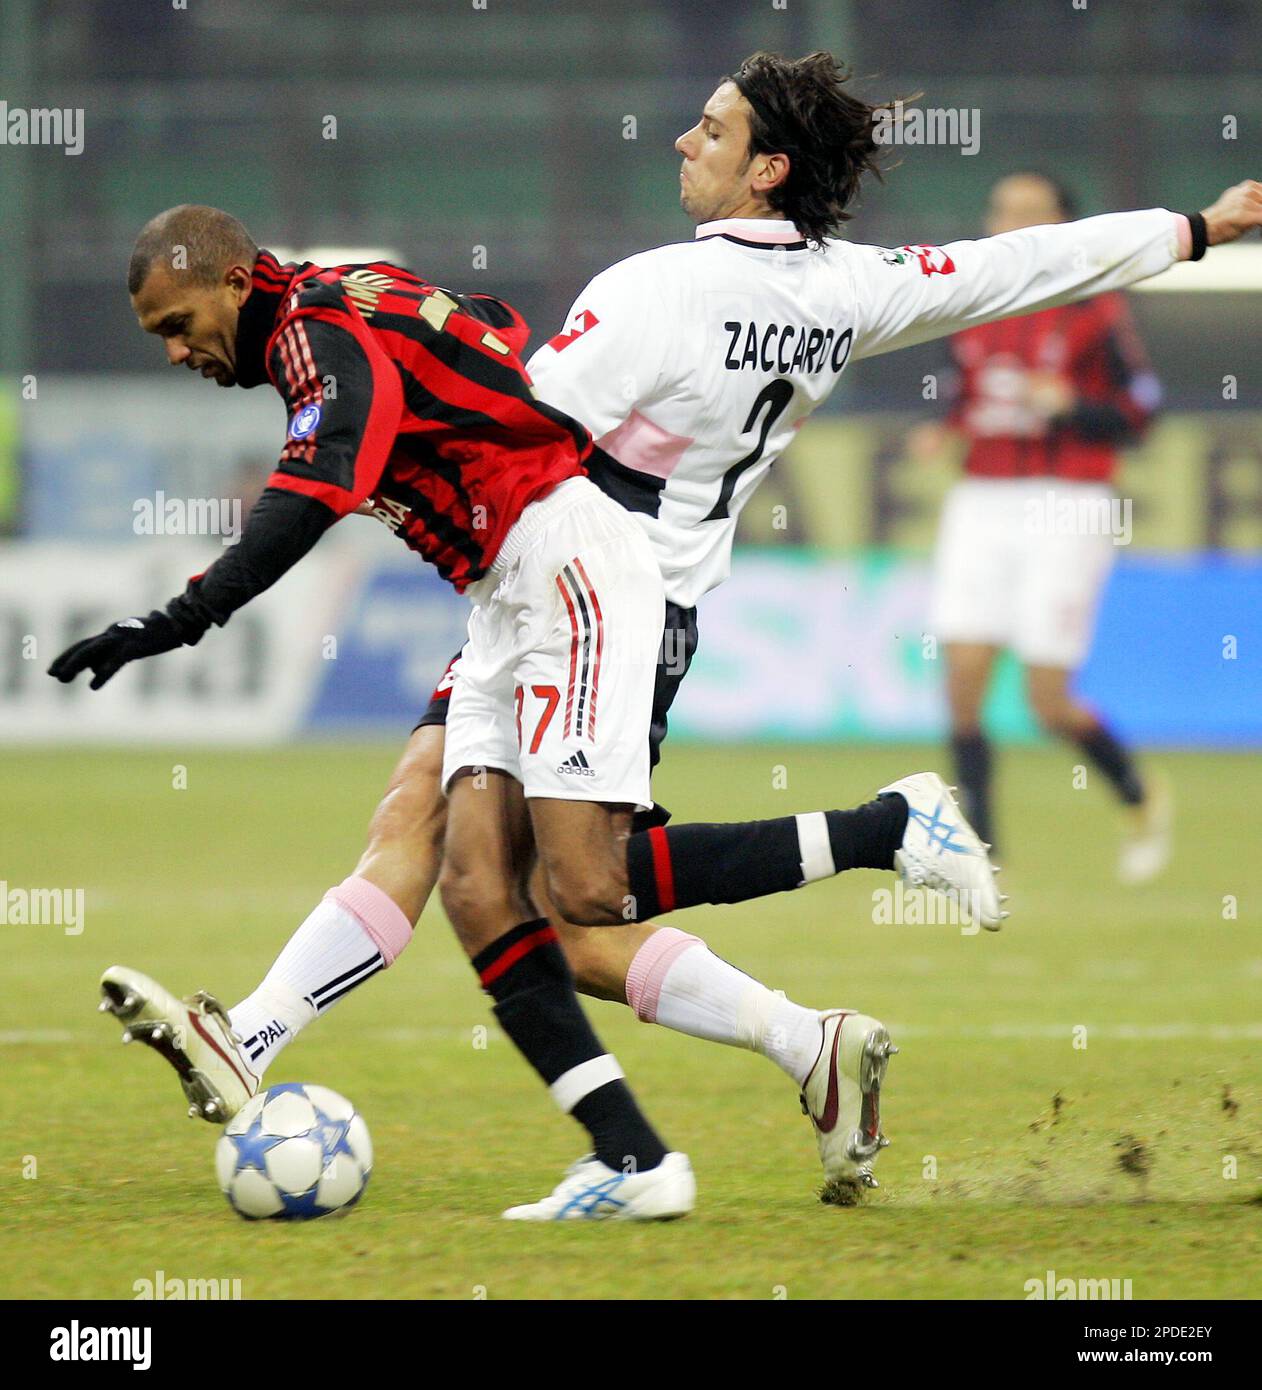 AC Milan Brazilian forward Marcio Amoroso, left, and Palermo defender  Cristian Zaccardo compete for the ball during their Italian Cup soccer  match at the San Siro stadium in Milan, Italy, Wednesday, Jan.